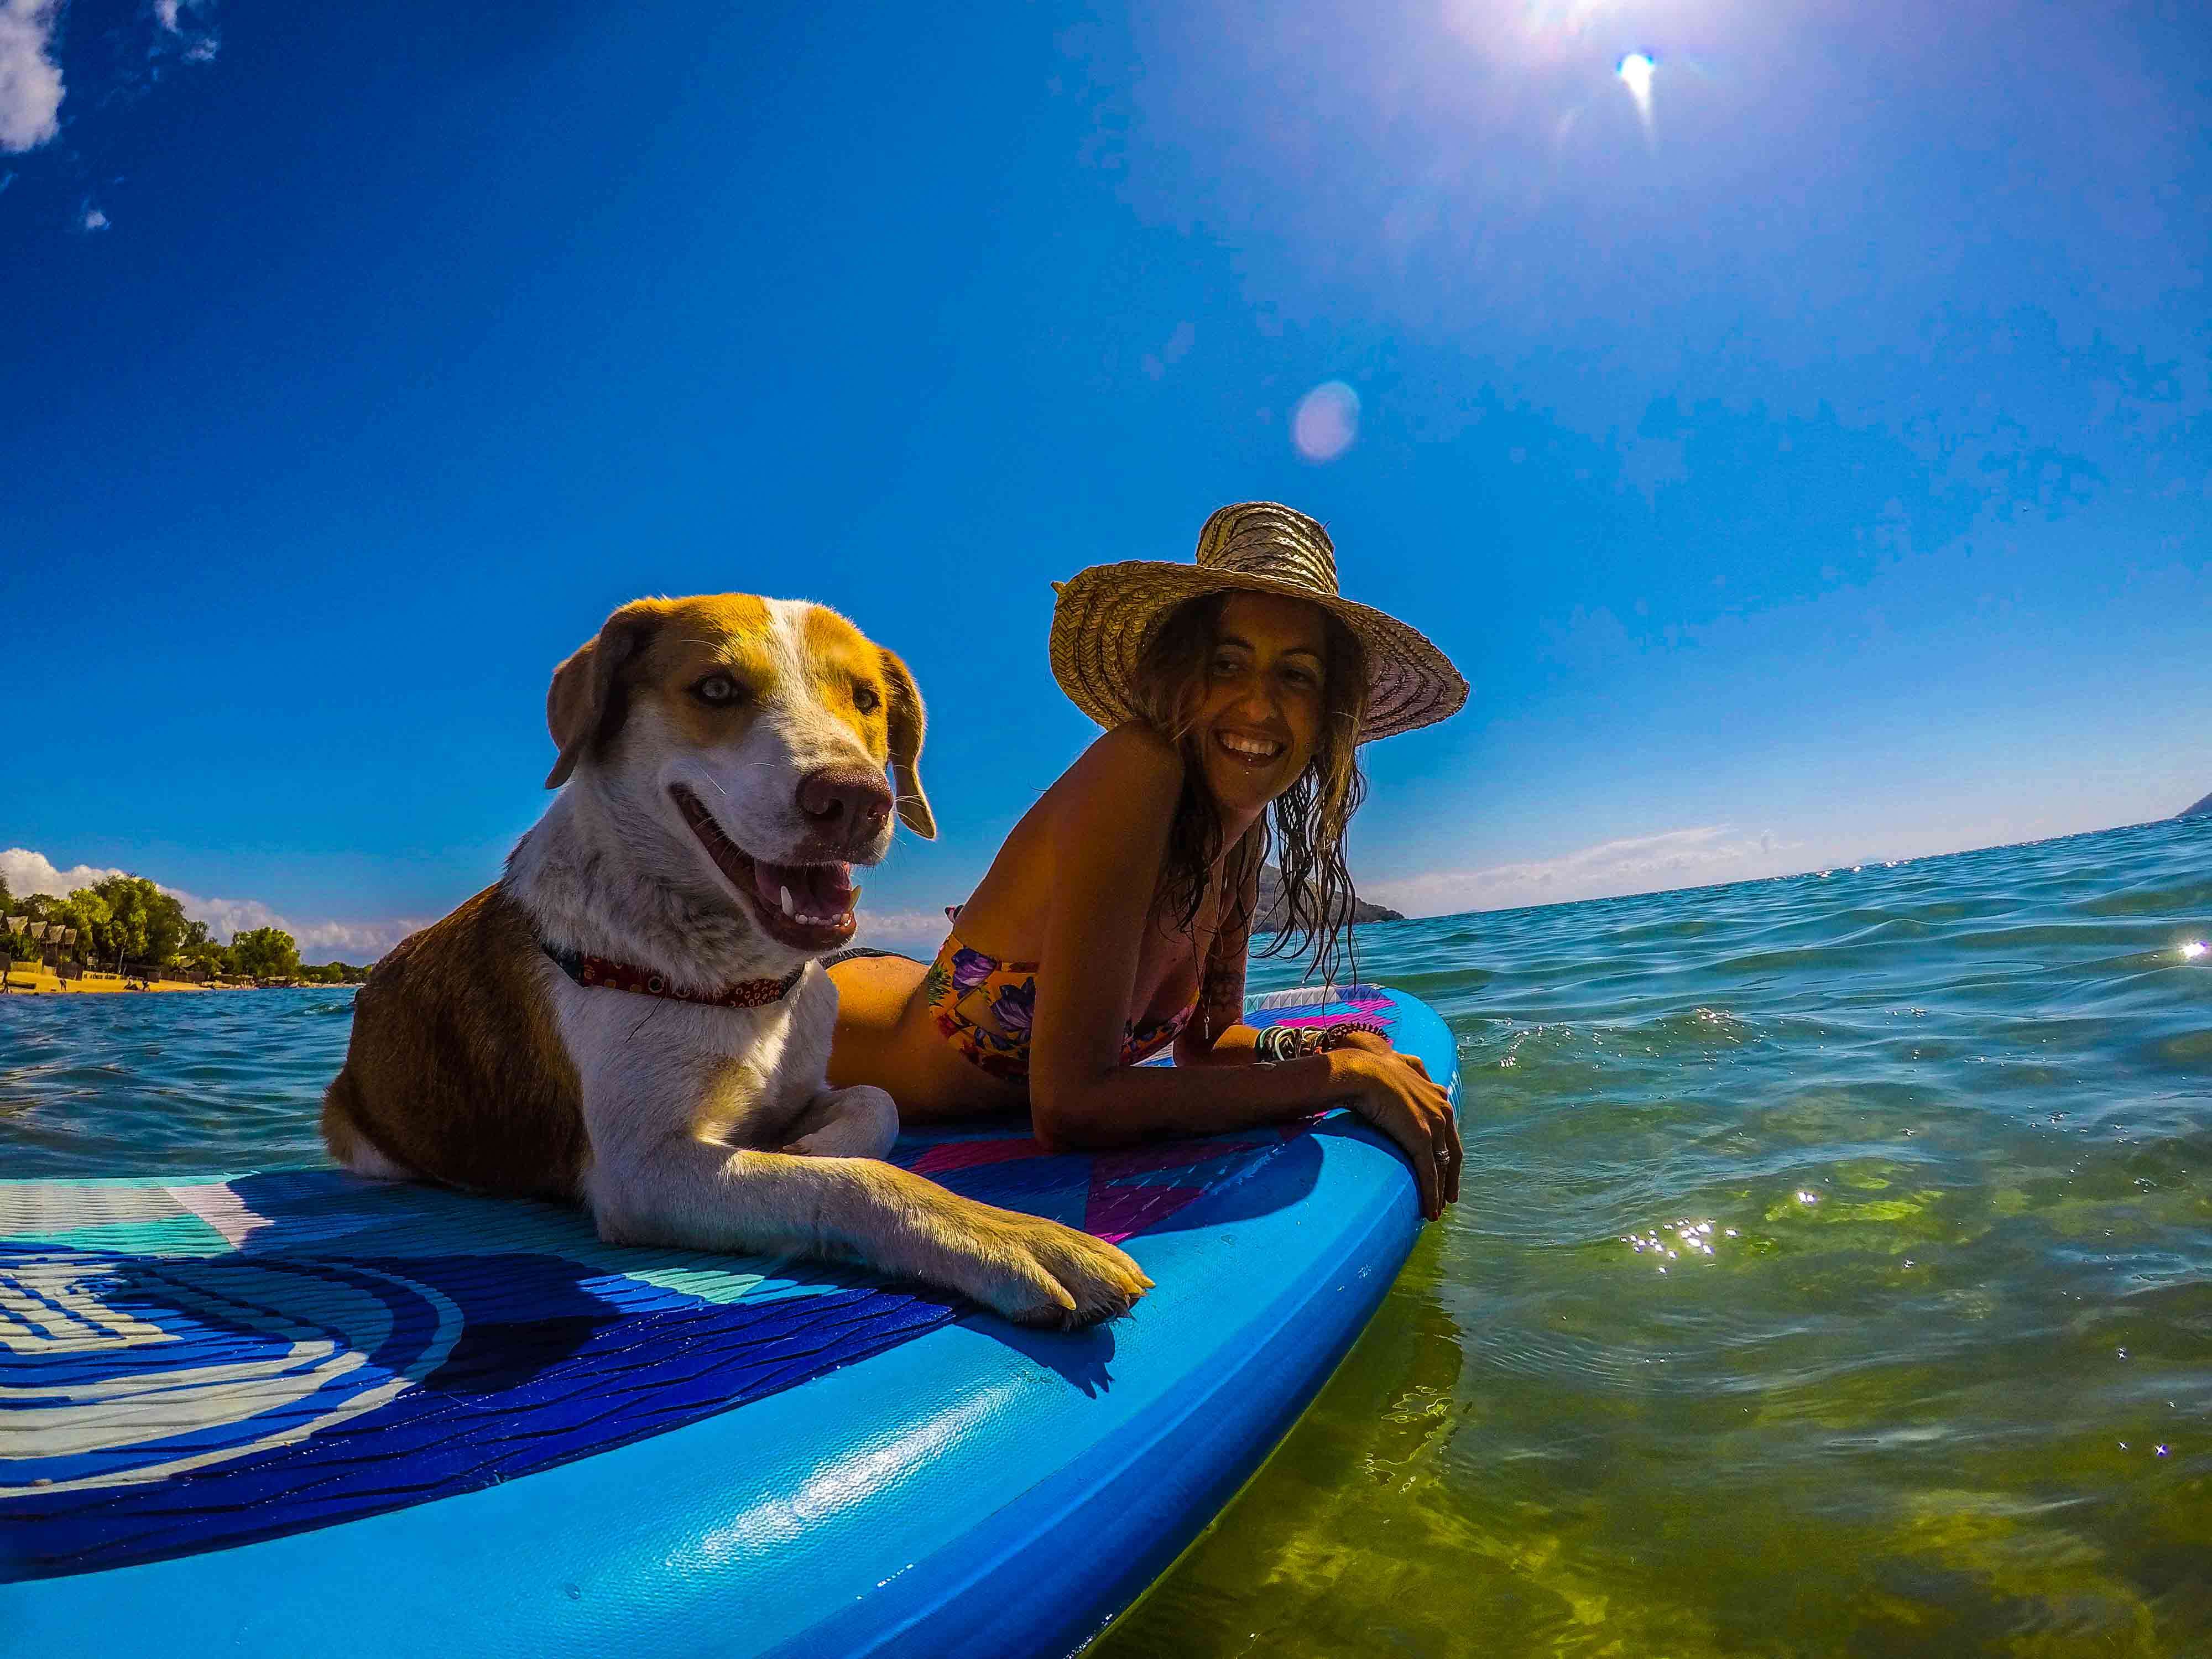 Dog and woman on paddleboard together